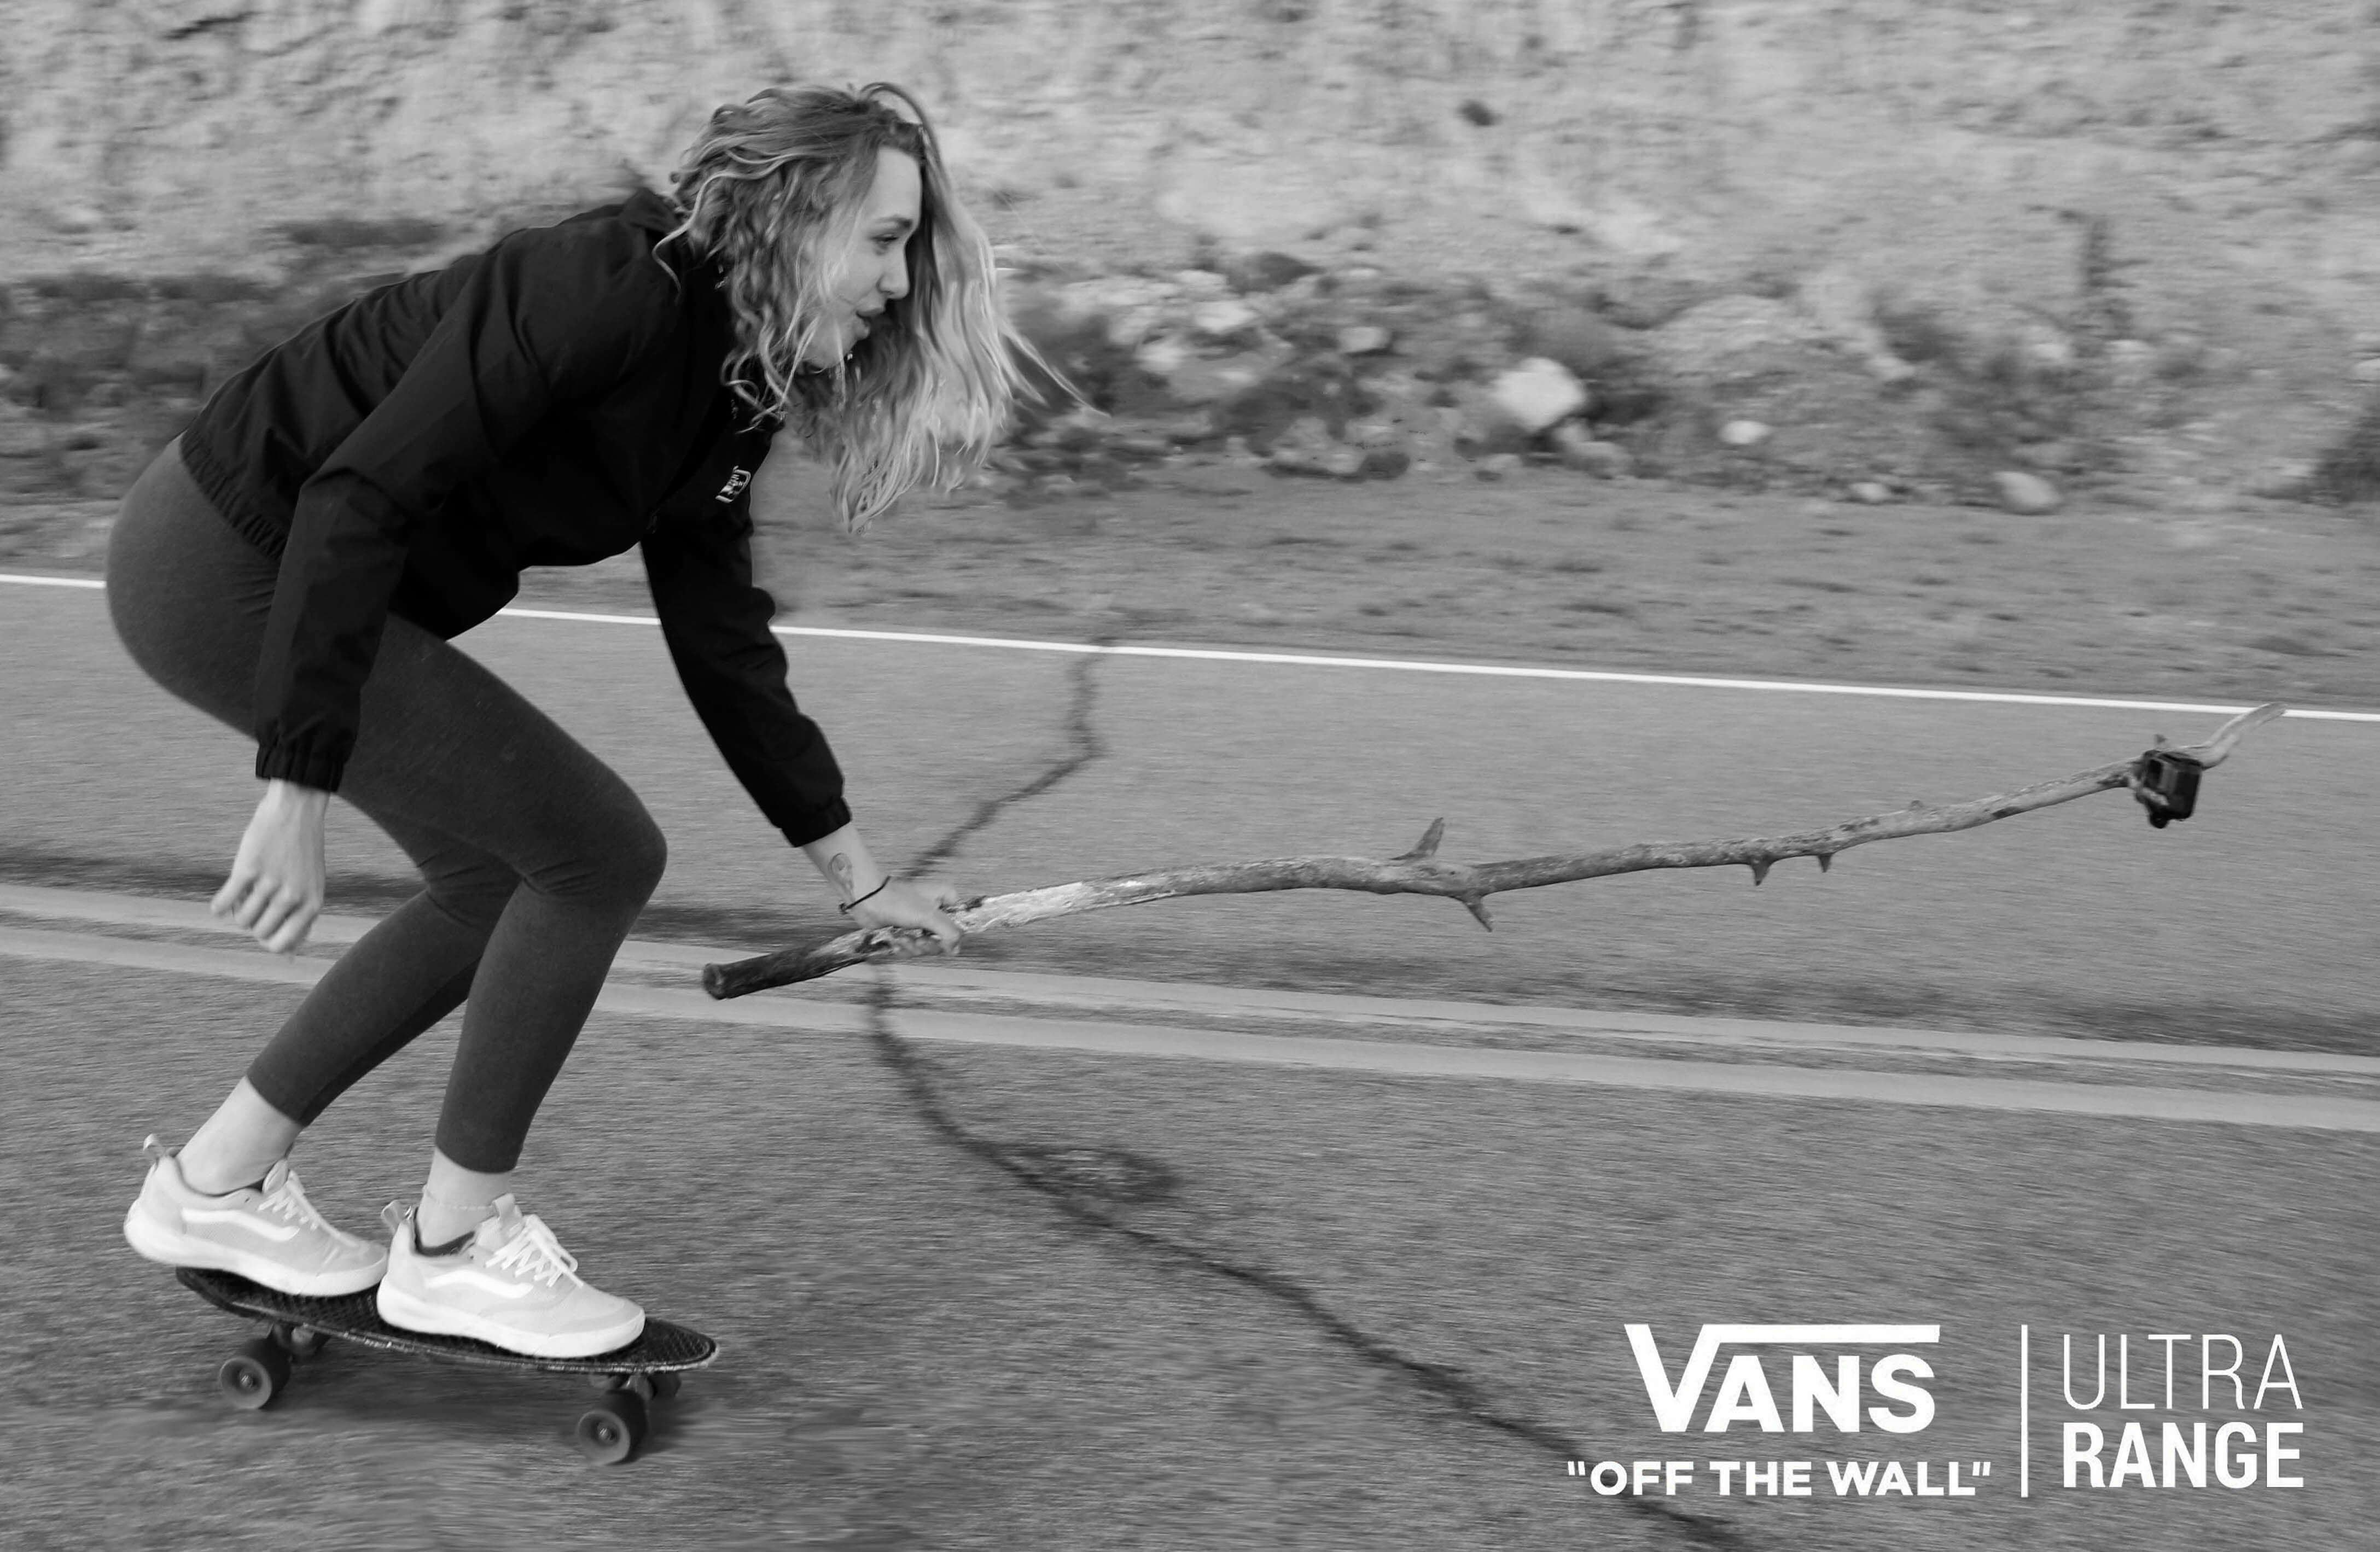 Me on a skateboard with Vans logo